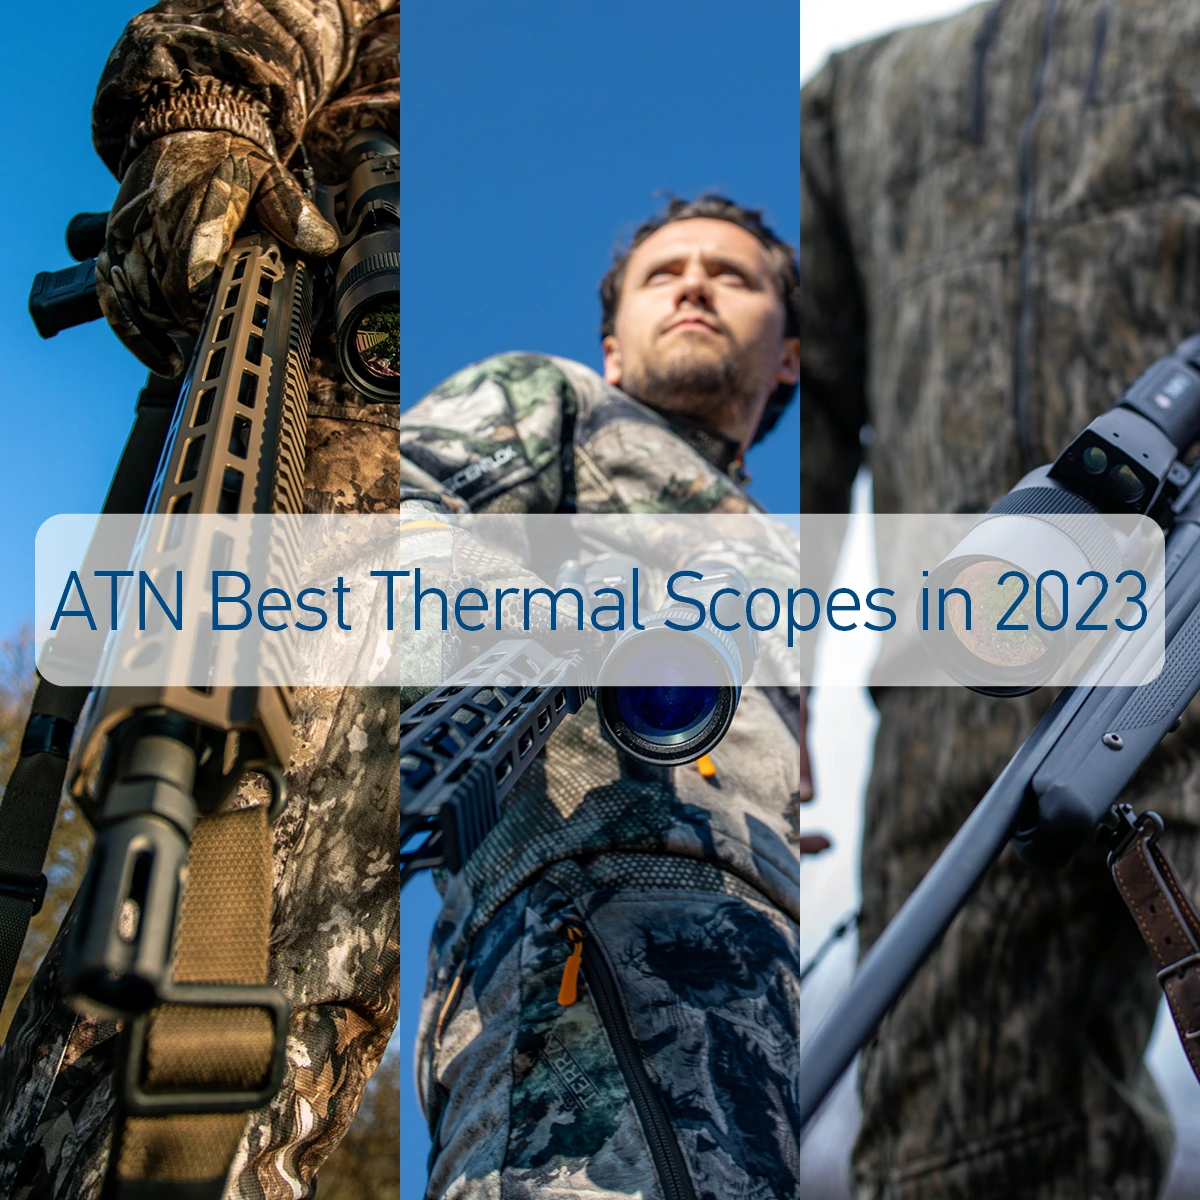 OUR Best Thermal Scope in 2023